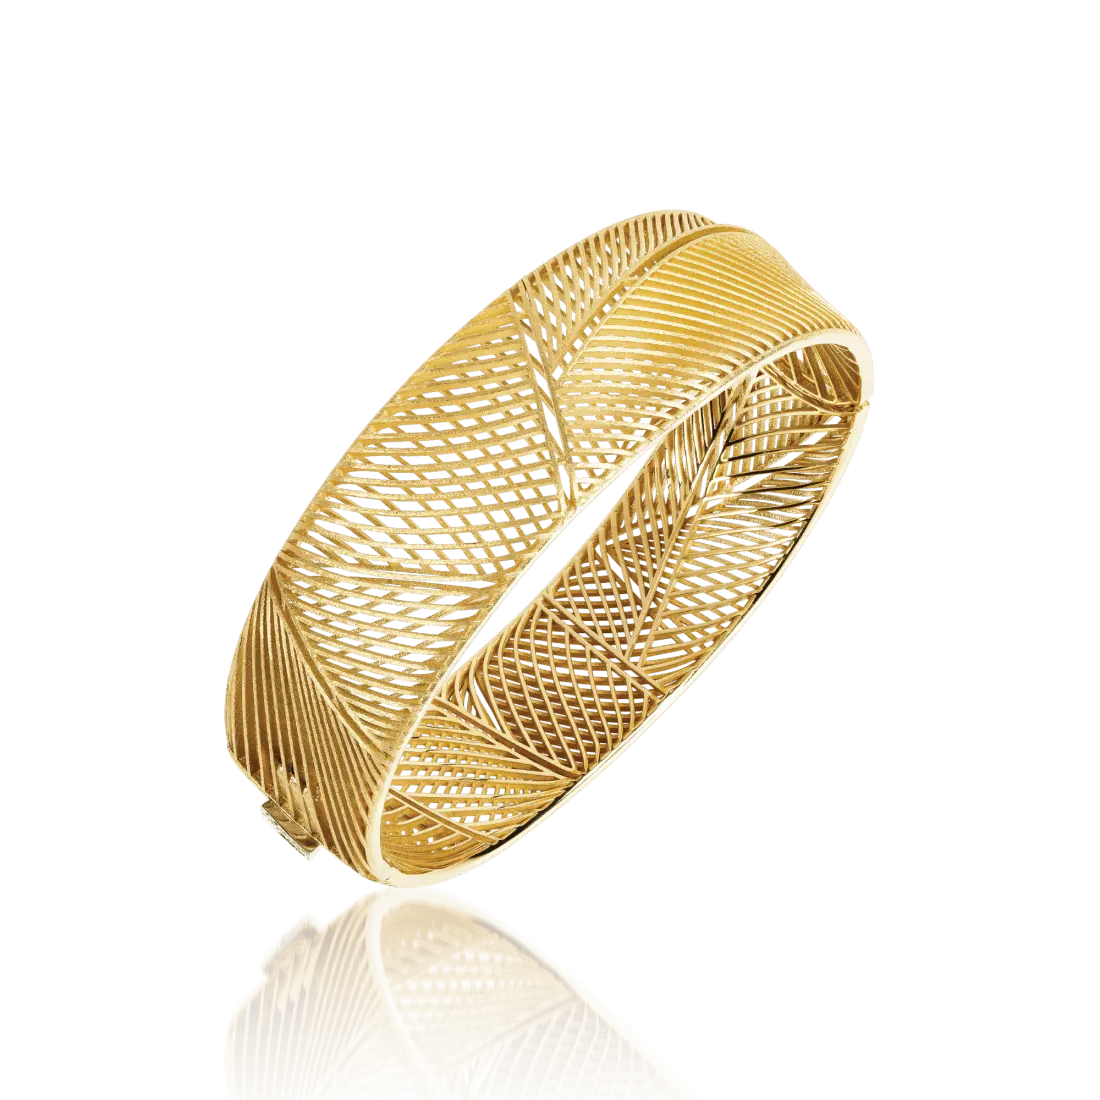 Narrow bracelet in 18k yellow gold with 18k white gold clasp diamonds.   Details:  Approximate width: 19.7 mm. Approx. gold weight: 38.50 g Diamonds: 0.02 ct round brilliant-cut VS G/H Designed by Luisa Rosas and made in Portugal